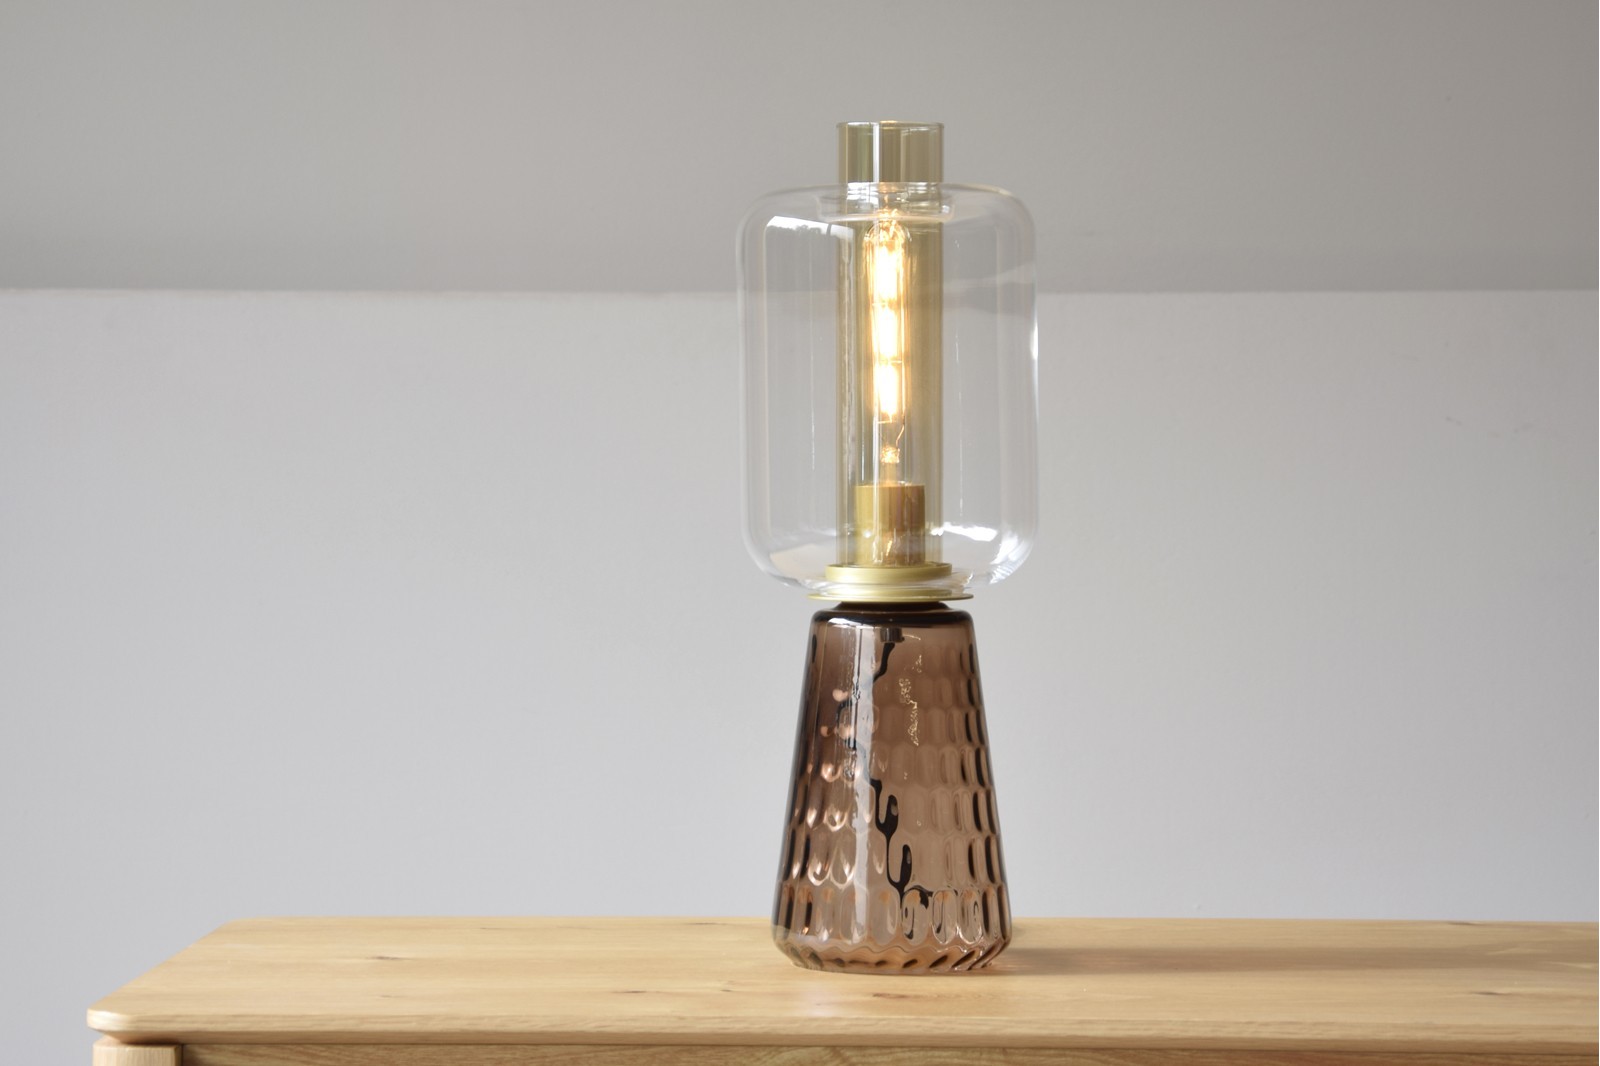 TABLE LAMP COLLECTION CANDIL. AMBER GLASS. LED